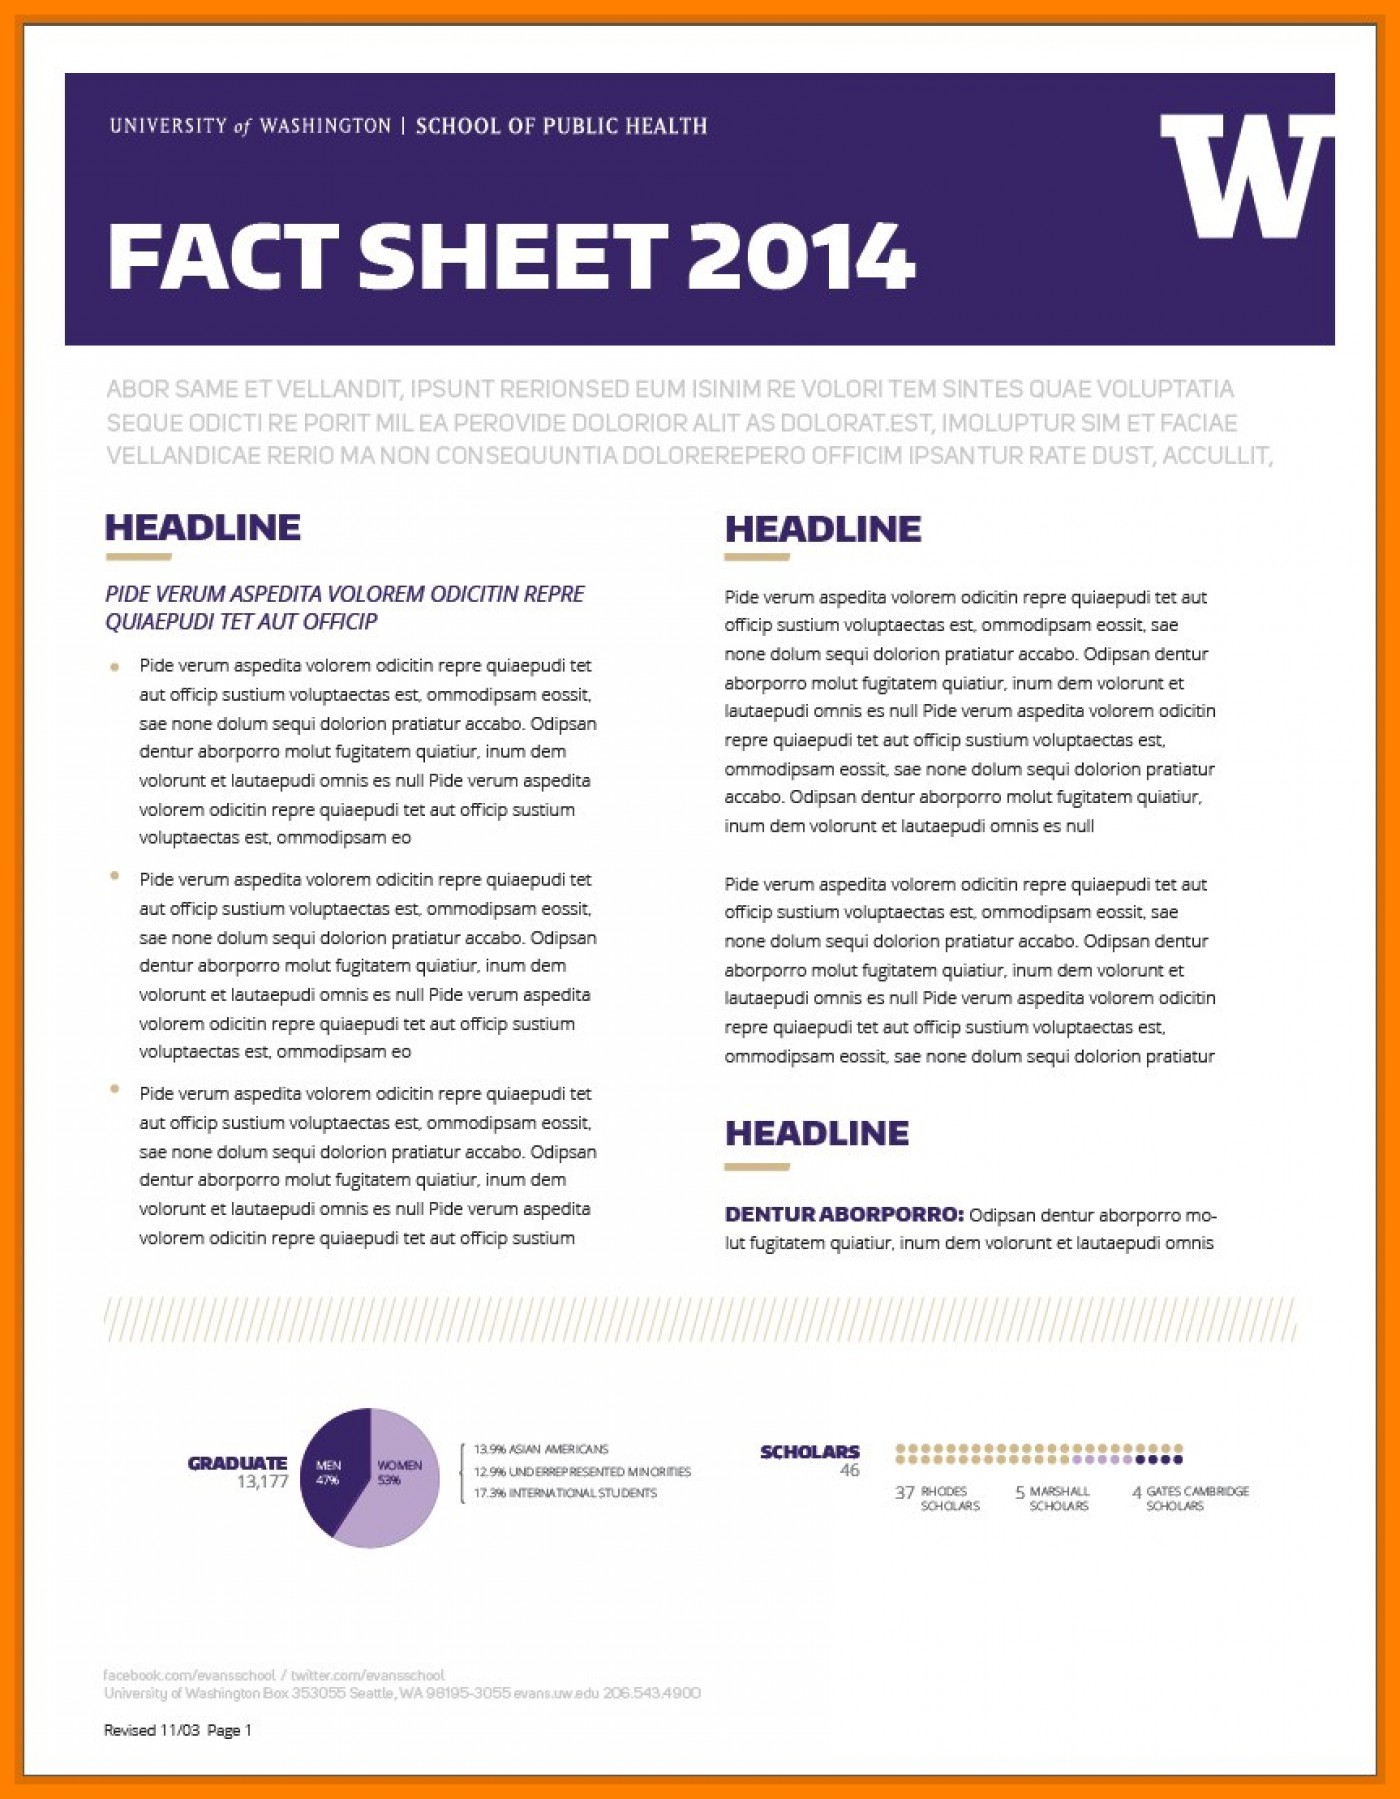 019-free-fact-sheet-template-ideas-agec752-developing-intended-for-fact